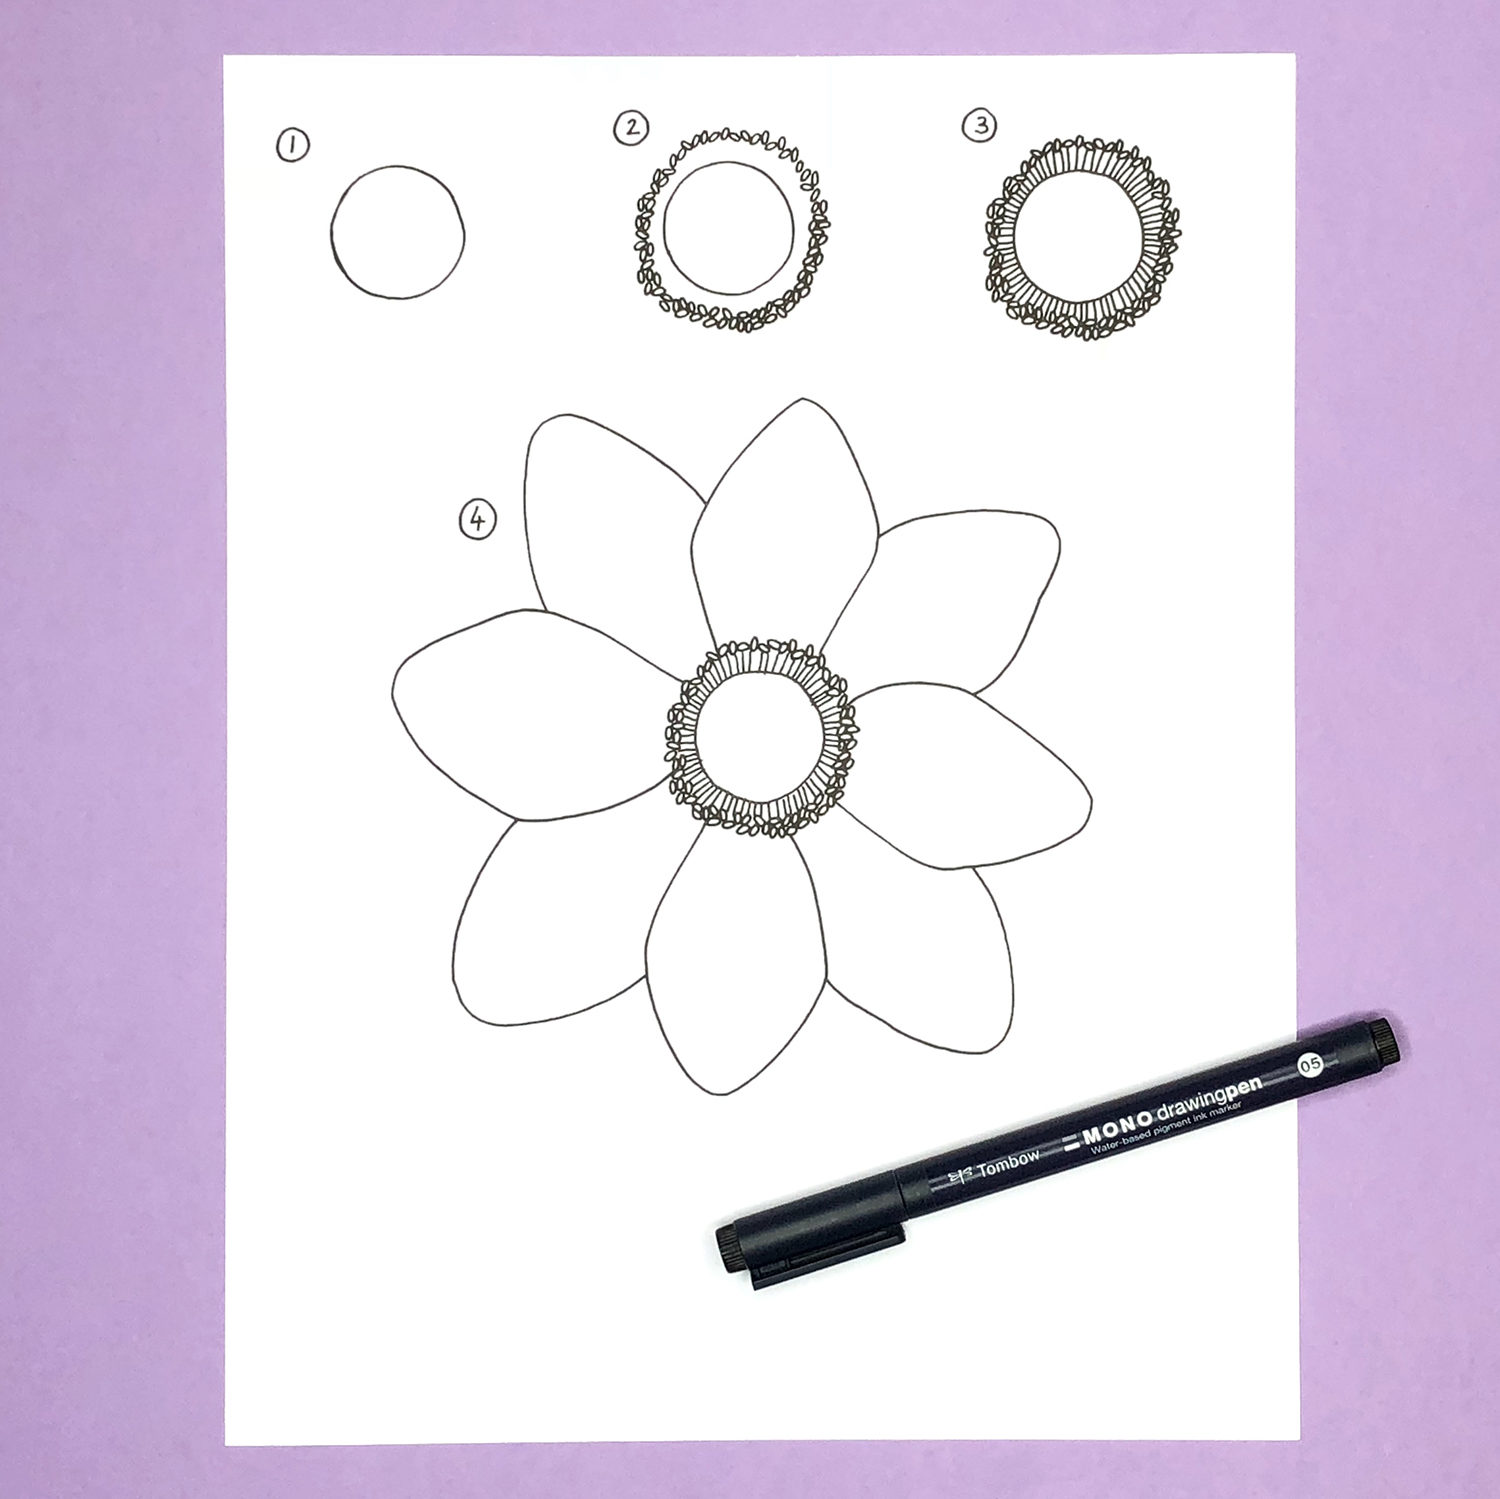 How to Draw an Anemone Flower by Jessica Mack on behalf of Tombow